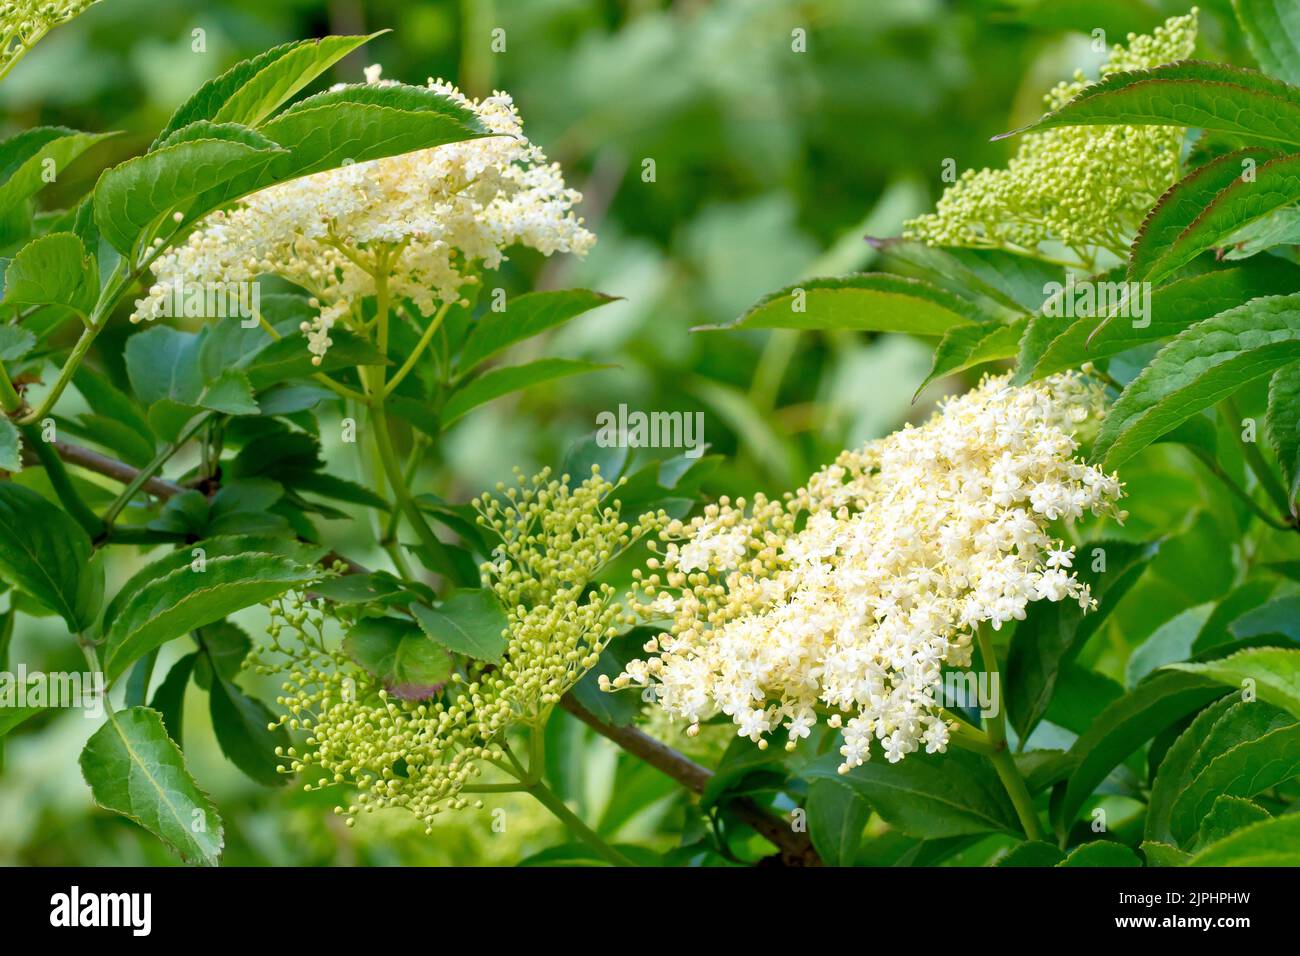 Elder (sambucus nigra), close up showing the leaves, the flowerbuds and the large sprays of white flowers of the common shrub. Stock Photo